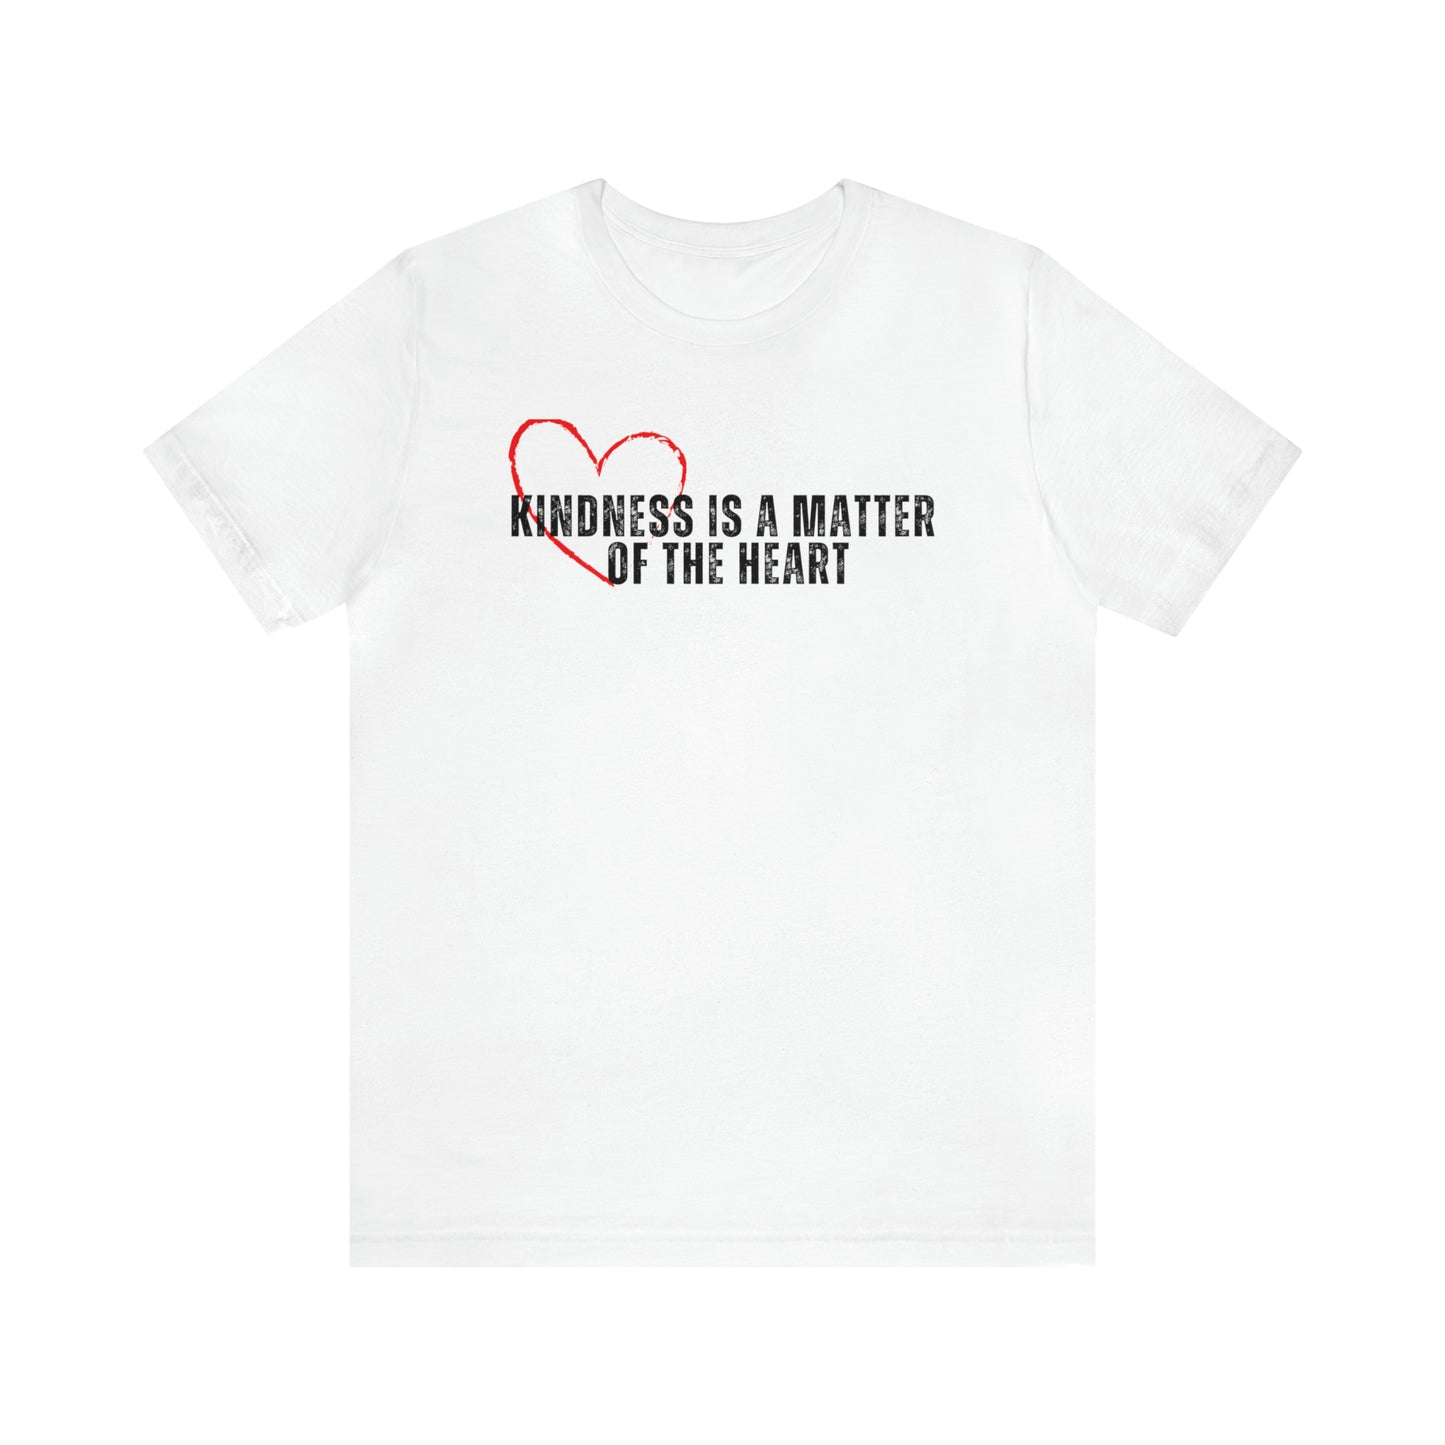 Kindness is the Matter of the Heart  T-Shirt  - Red Hot Heart